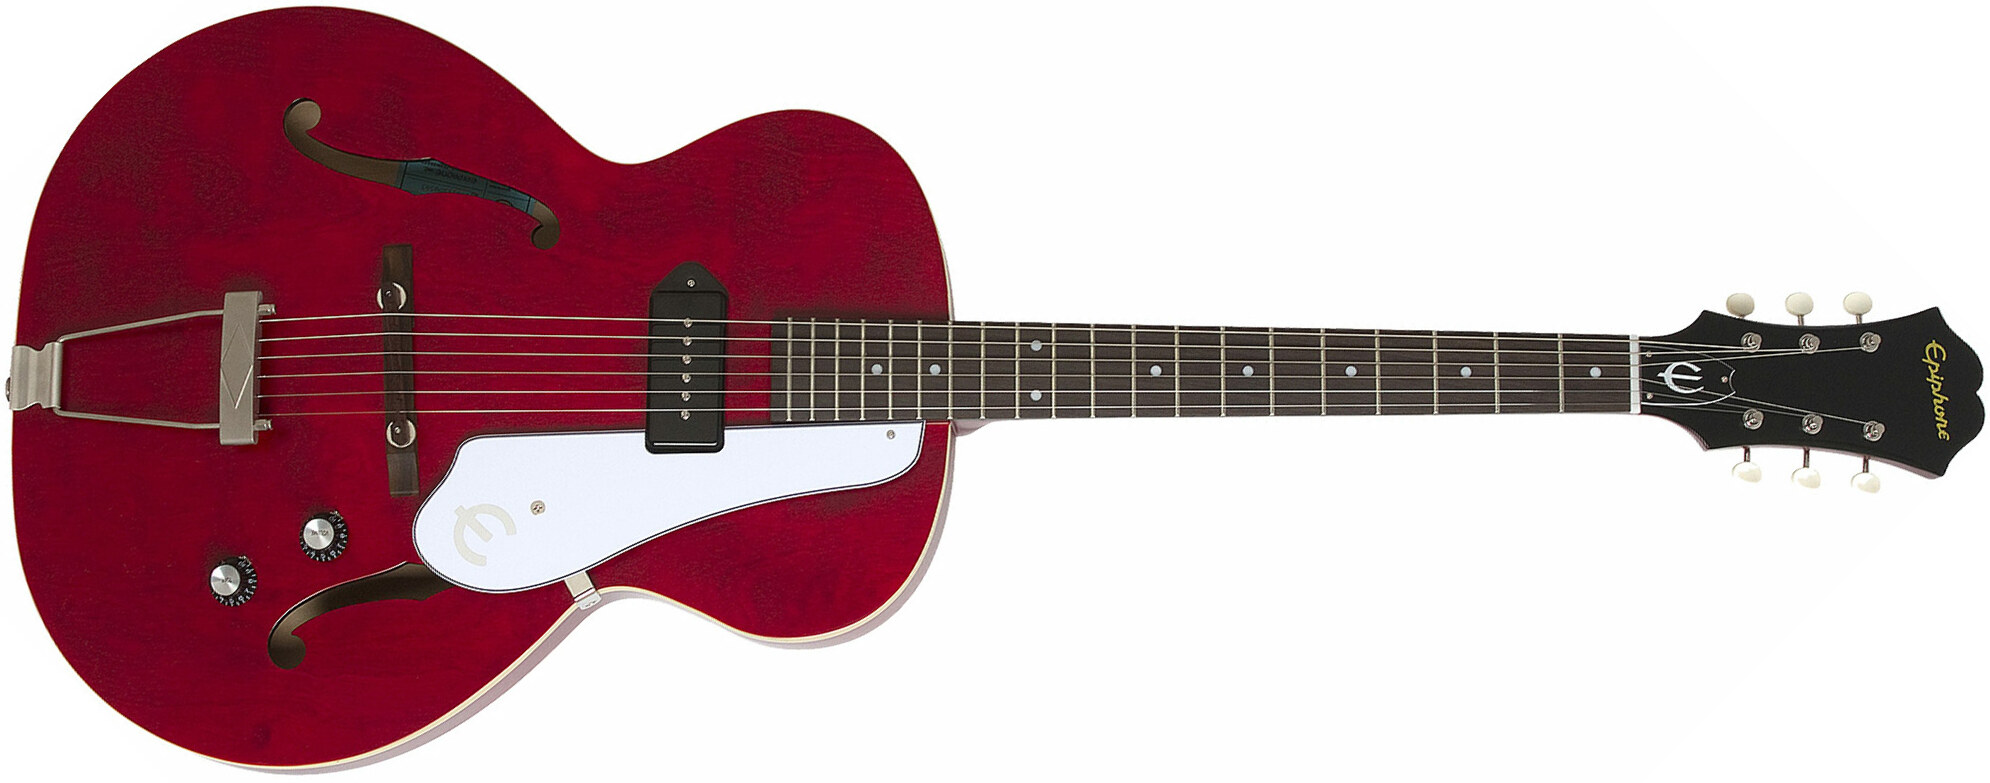 Epiphone Inspired By 1966 Century 2016 - Aged Gloss Cherry - Semi-hollow electric guitar - Main picture